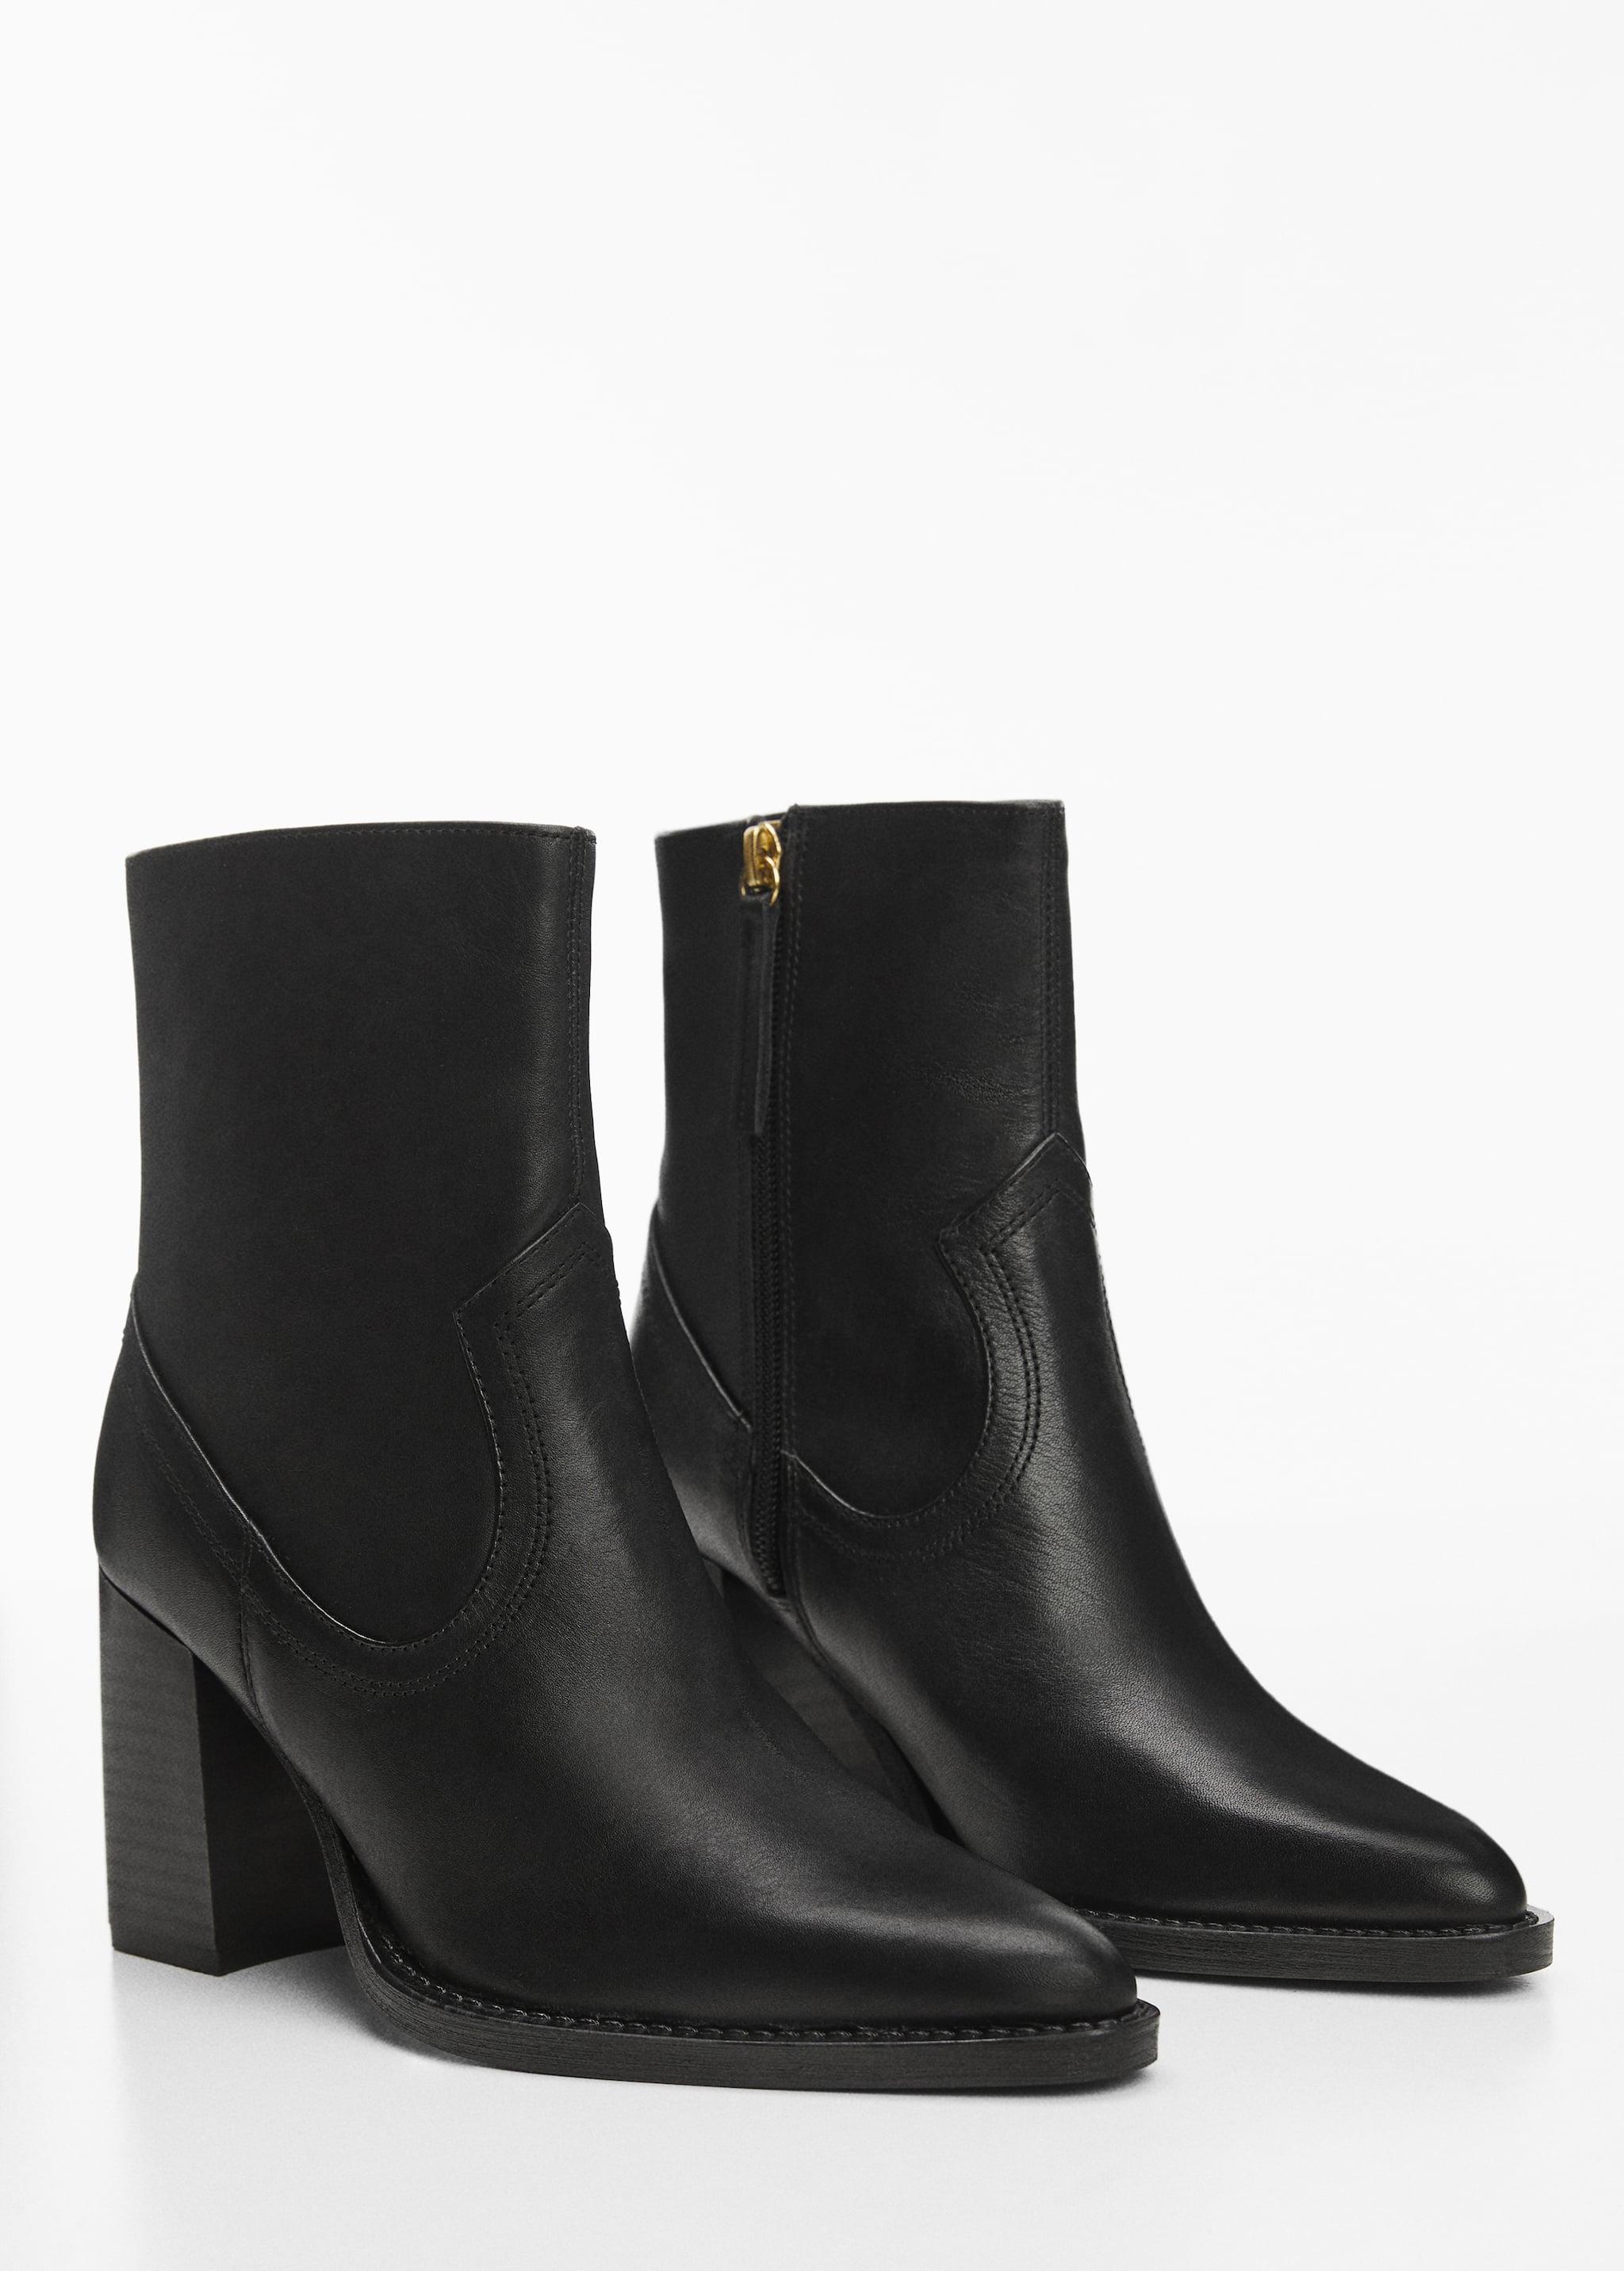 Leather ankle boots with block heel - Medium plane